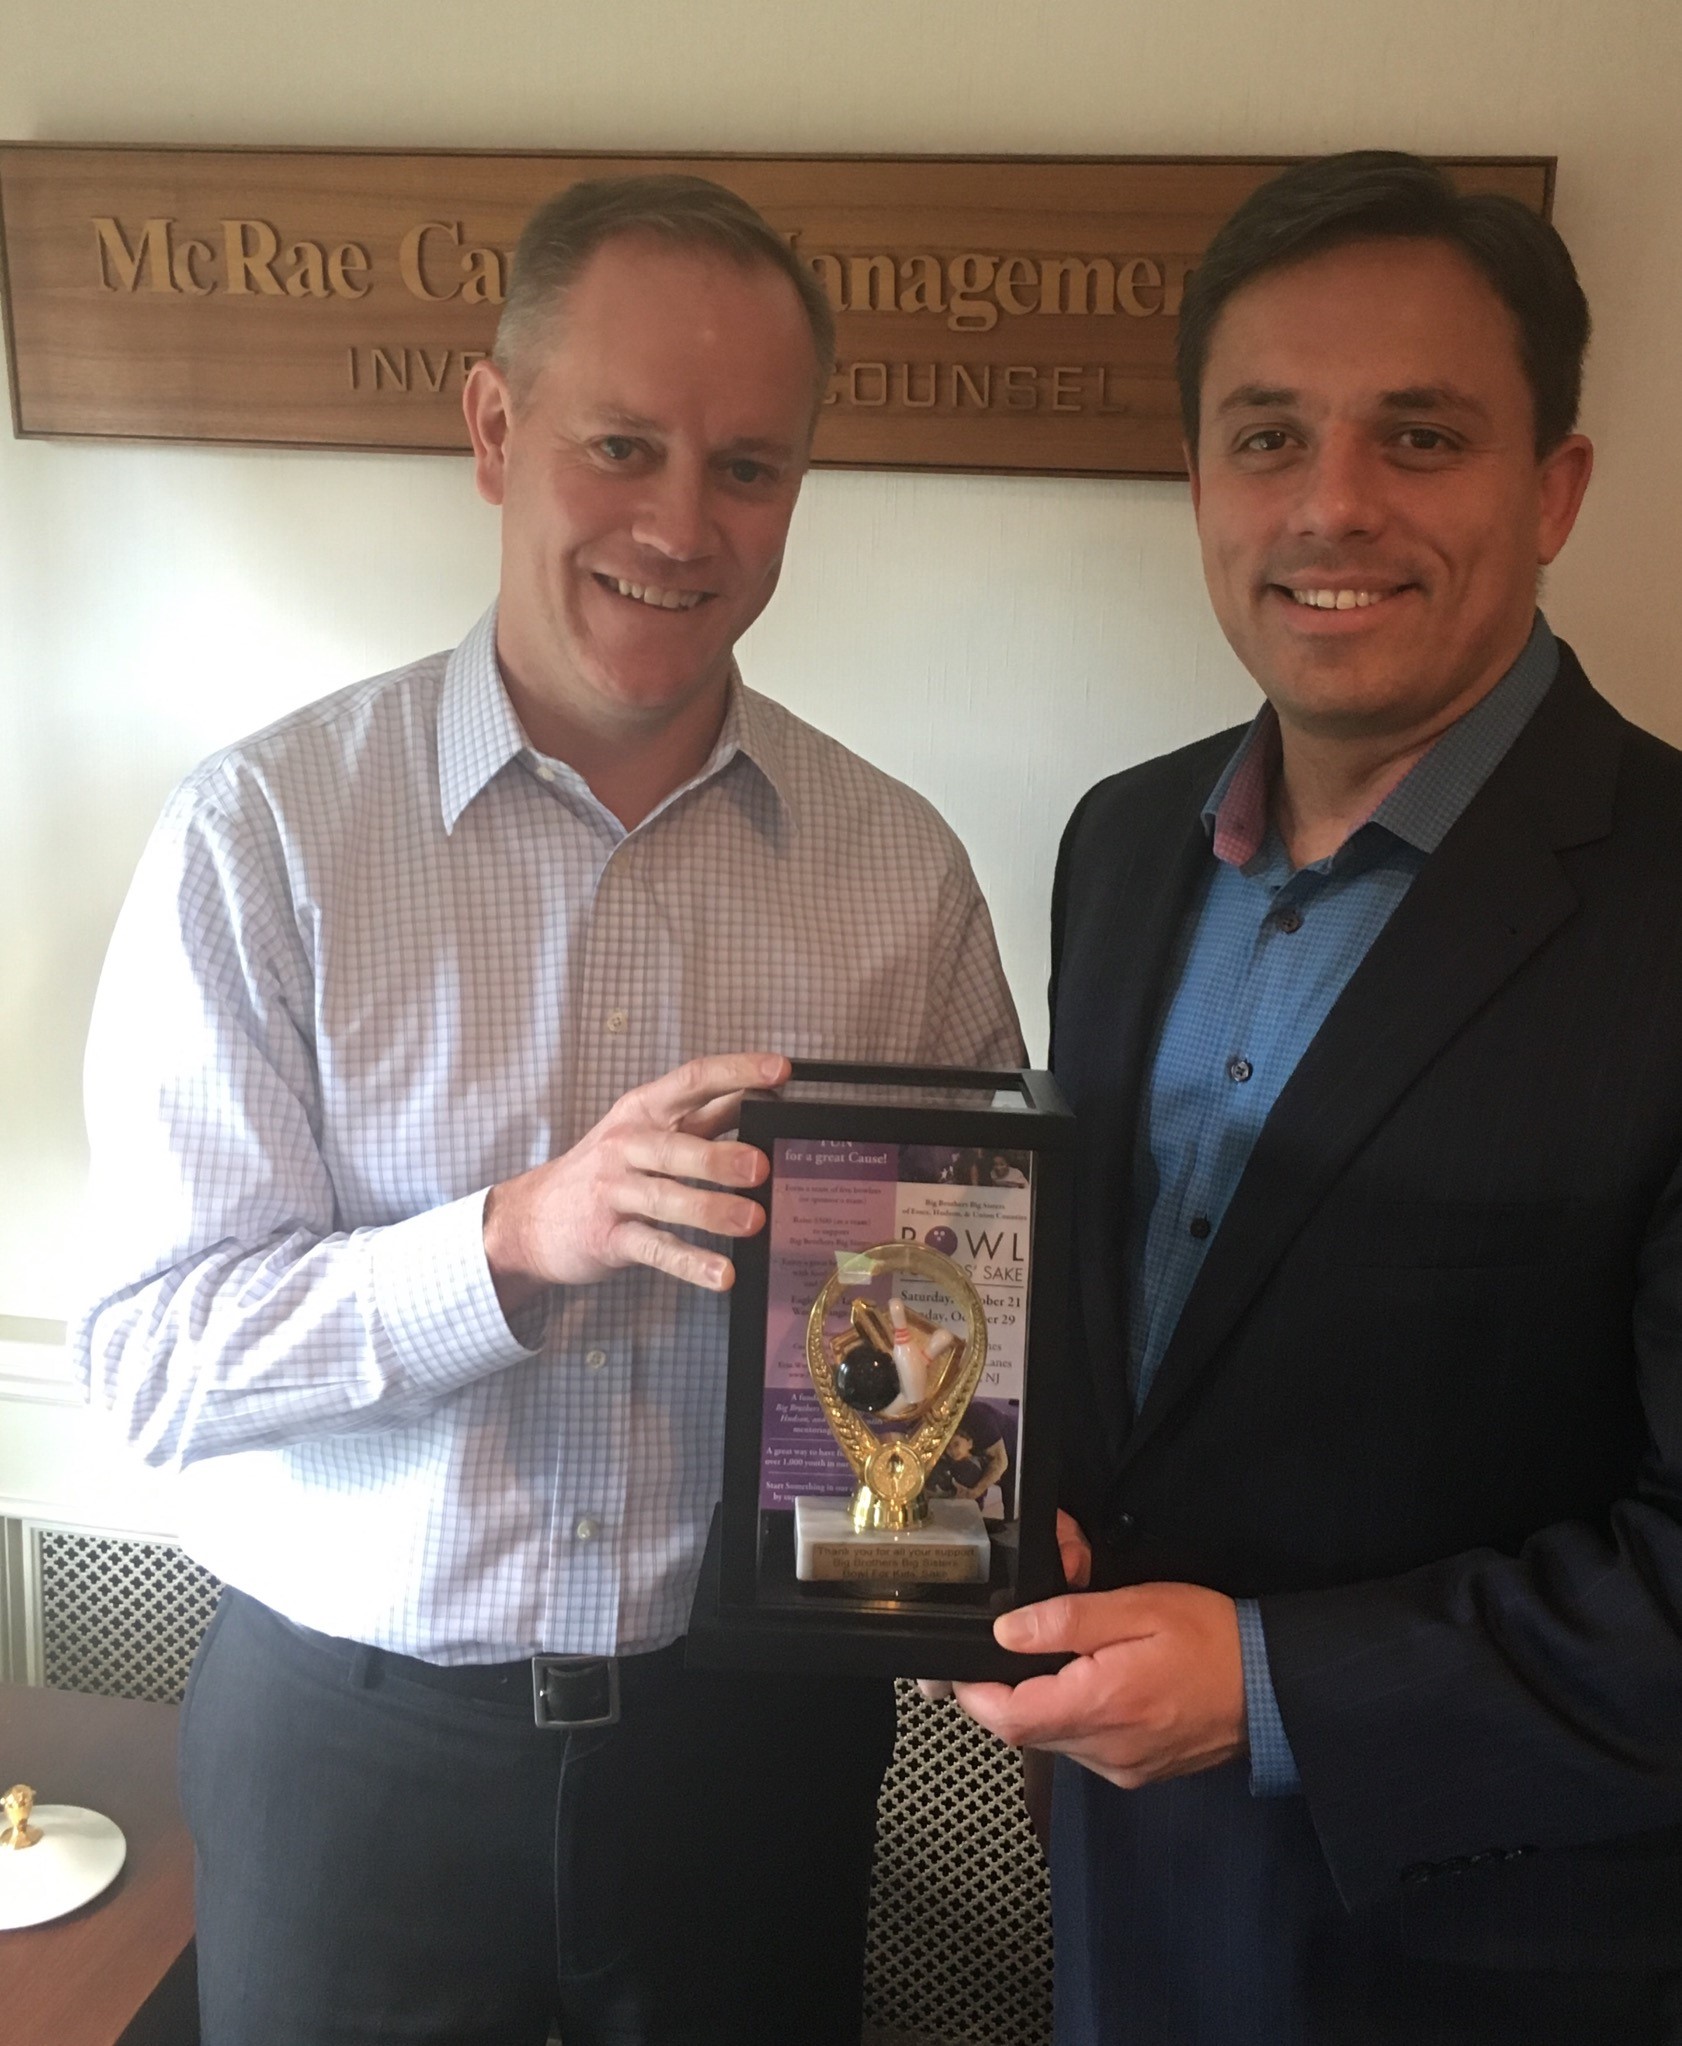 Peter McRae of McRae Capital Management is given a bowling trophy by BBBS regional CEO Carlos Lejnieks to recognize McRae's longtime support of Big Brothers Big Sisters of New Jersey (BBBS) at the Bowl For Kids Sake (BFKS) event in 2017.